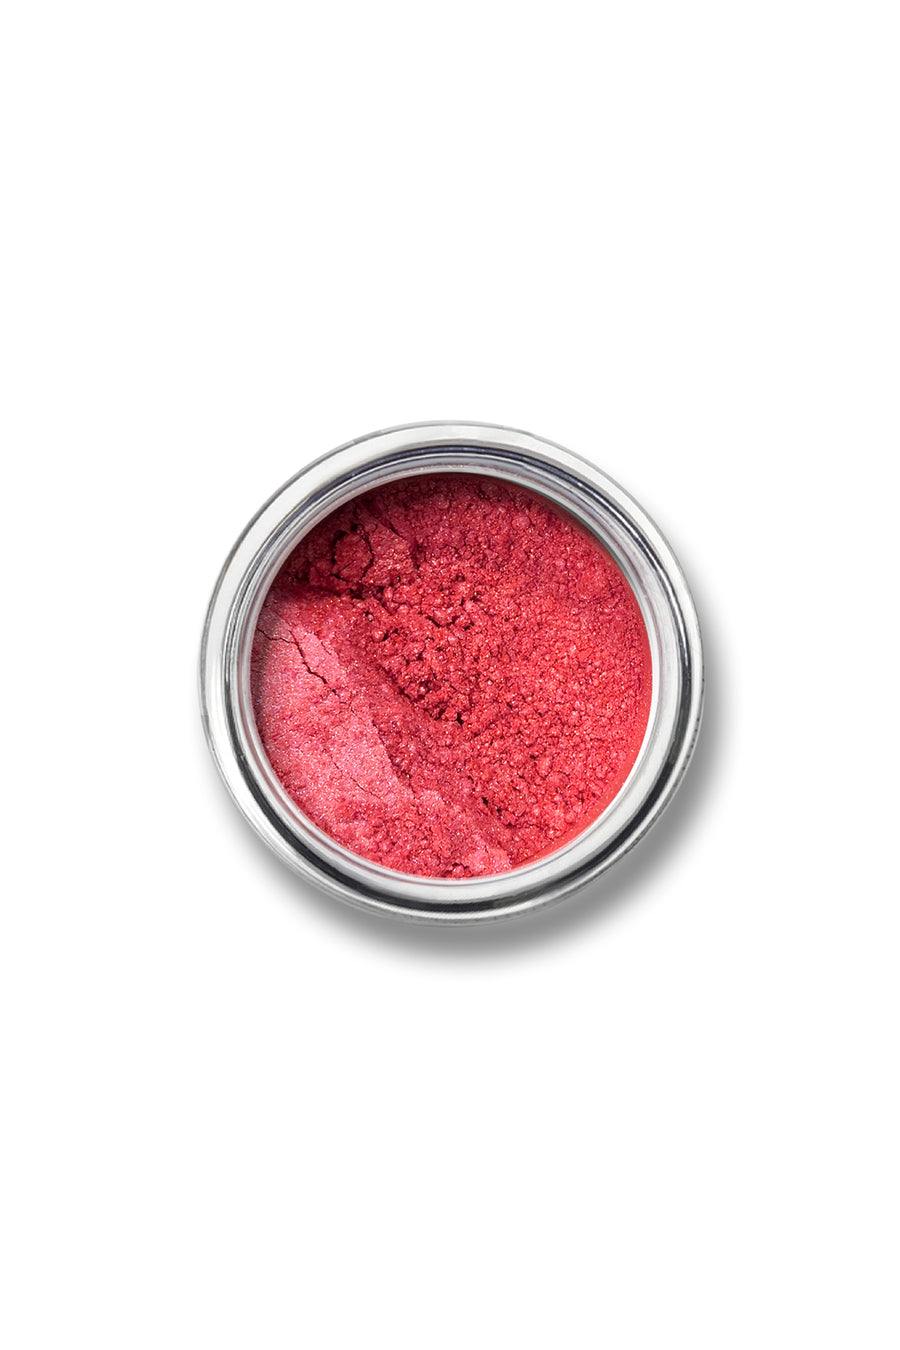 Shimmer Eyeshadow #61 - Peachy Red - Blend Mineral Cosmetics